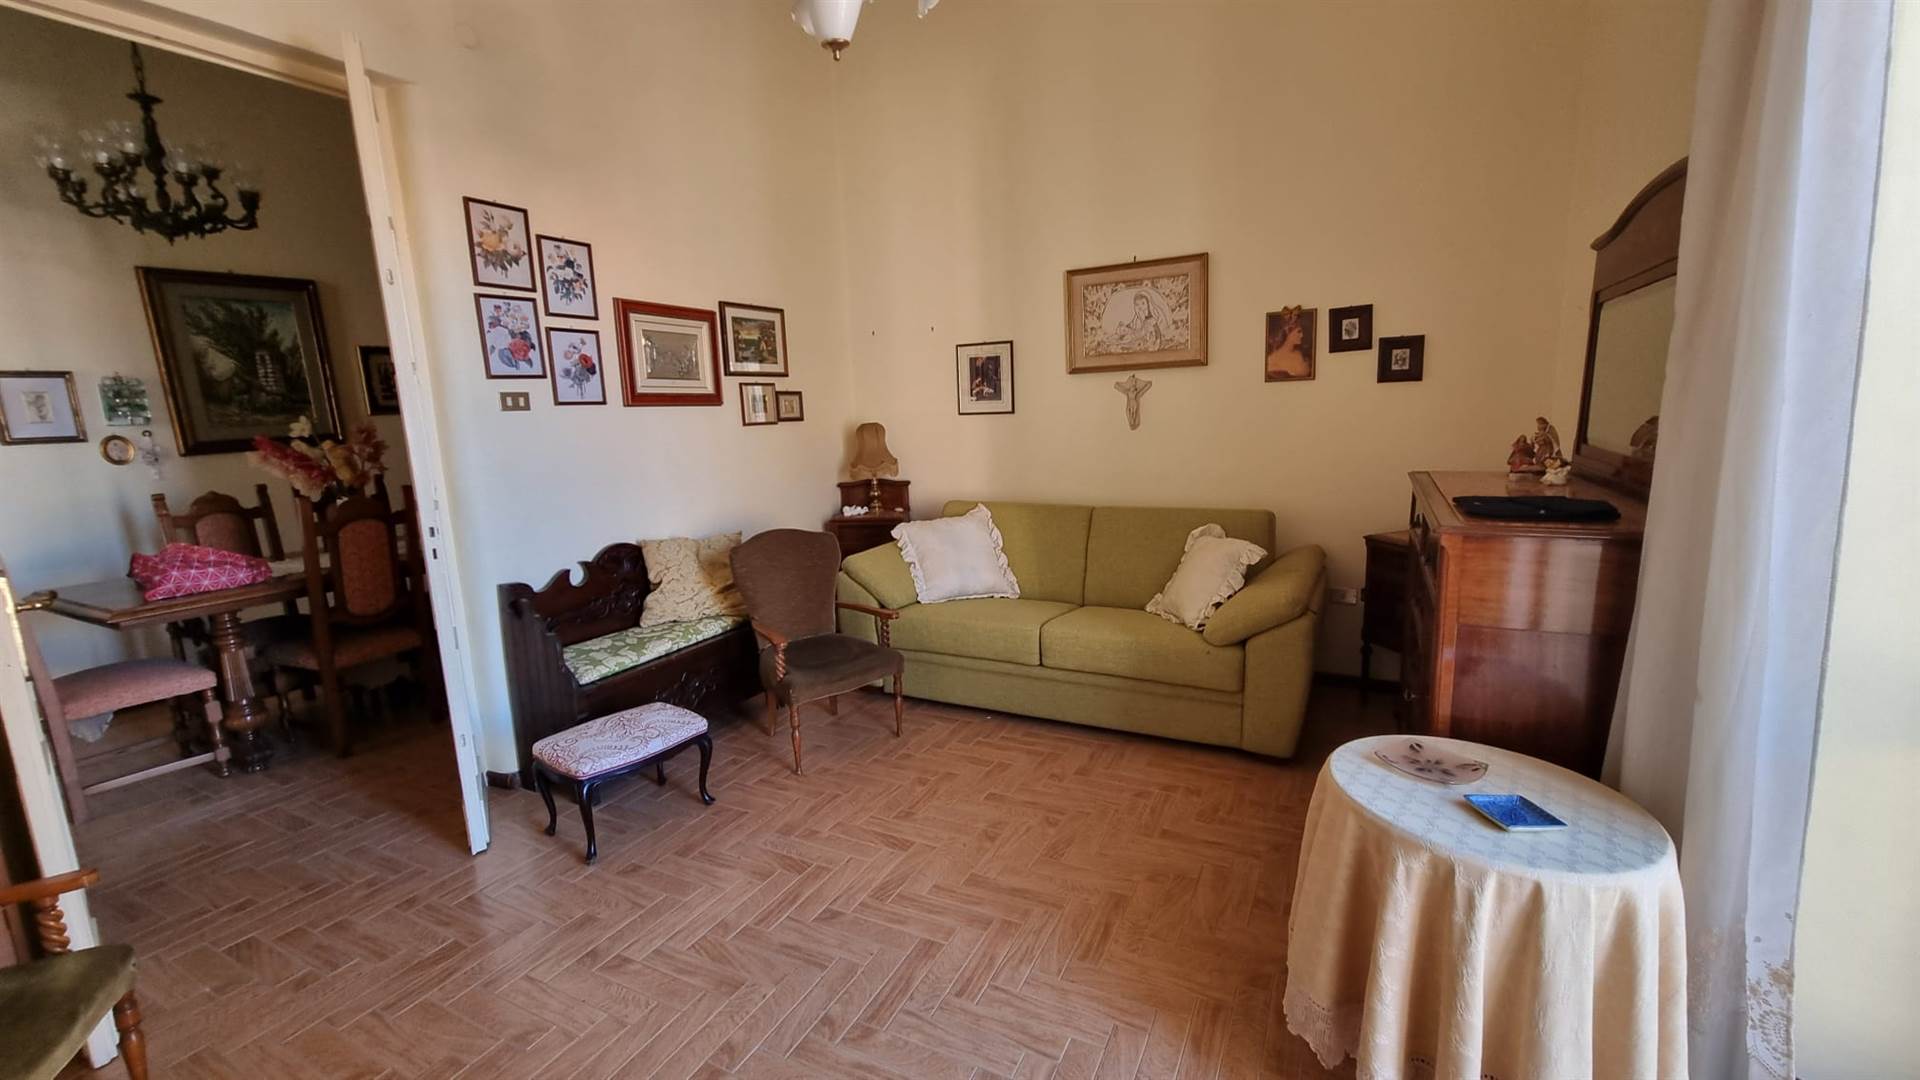 PICANELLO, CATANIA, Semi detached house for sale of 100 Sq. mt., Good condition, Heating Individual heating system, Energetic class: D, Epi: 3 kwh/m2 year, placed at 1° on 2, composed by: 3 Rooms, 